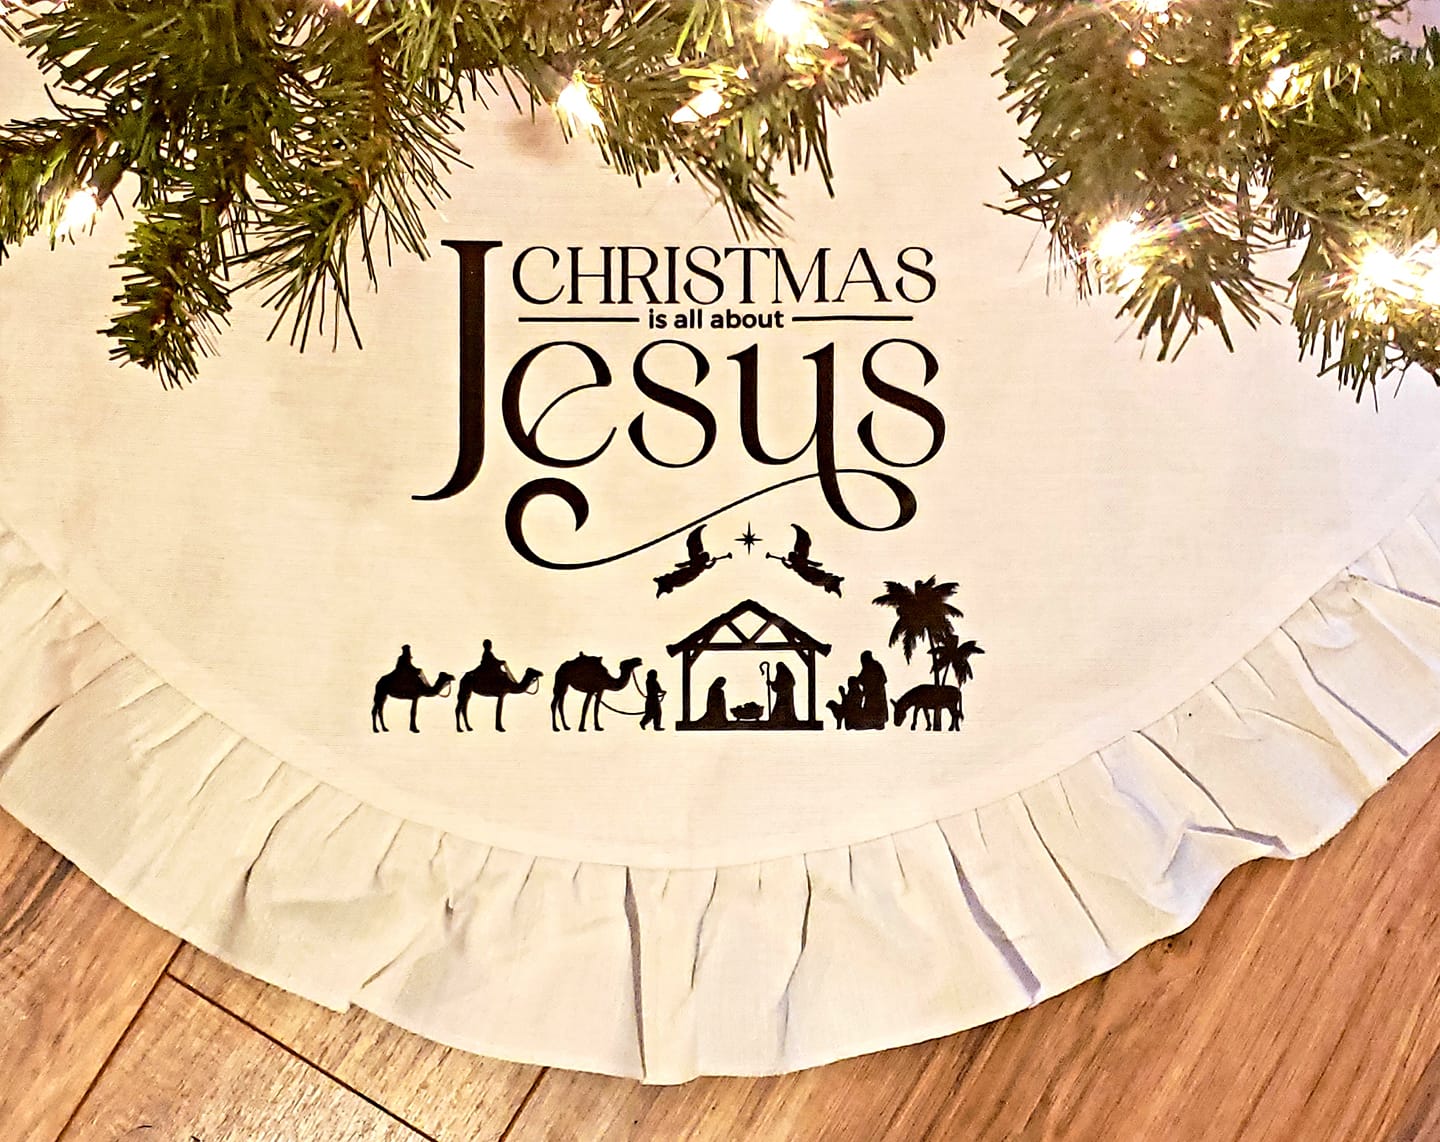 (Instant Print) Digital Download - Christmas is all about Jesus design - made for our sublimation tree skirts